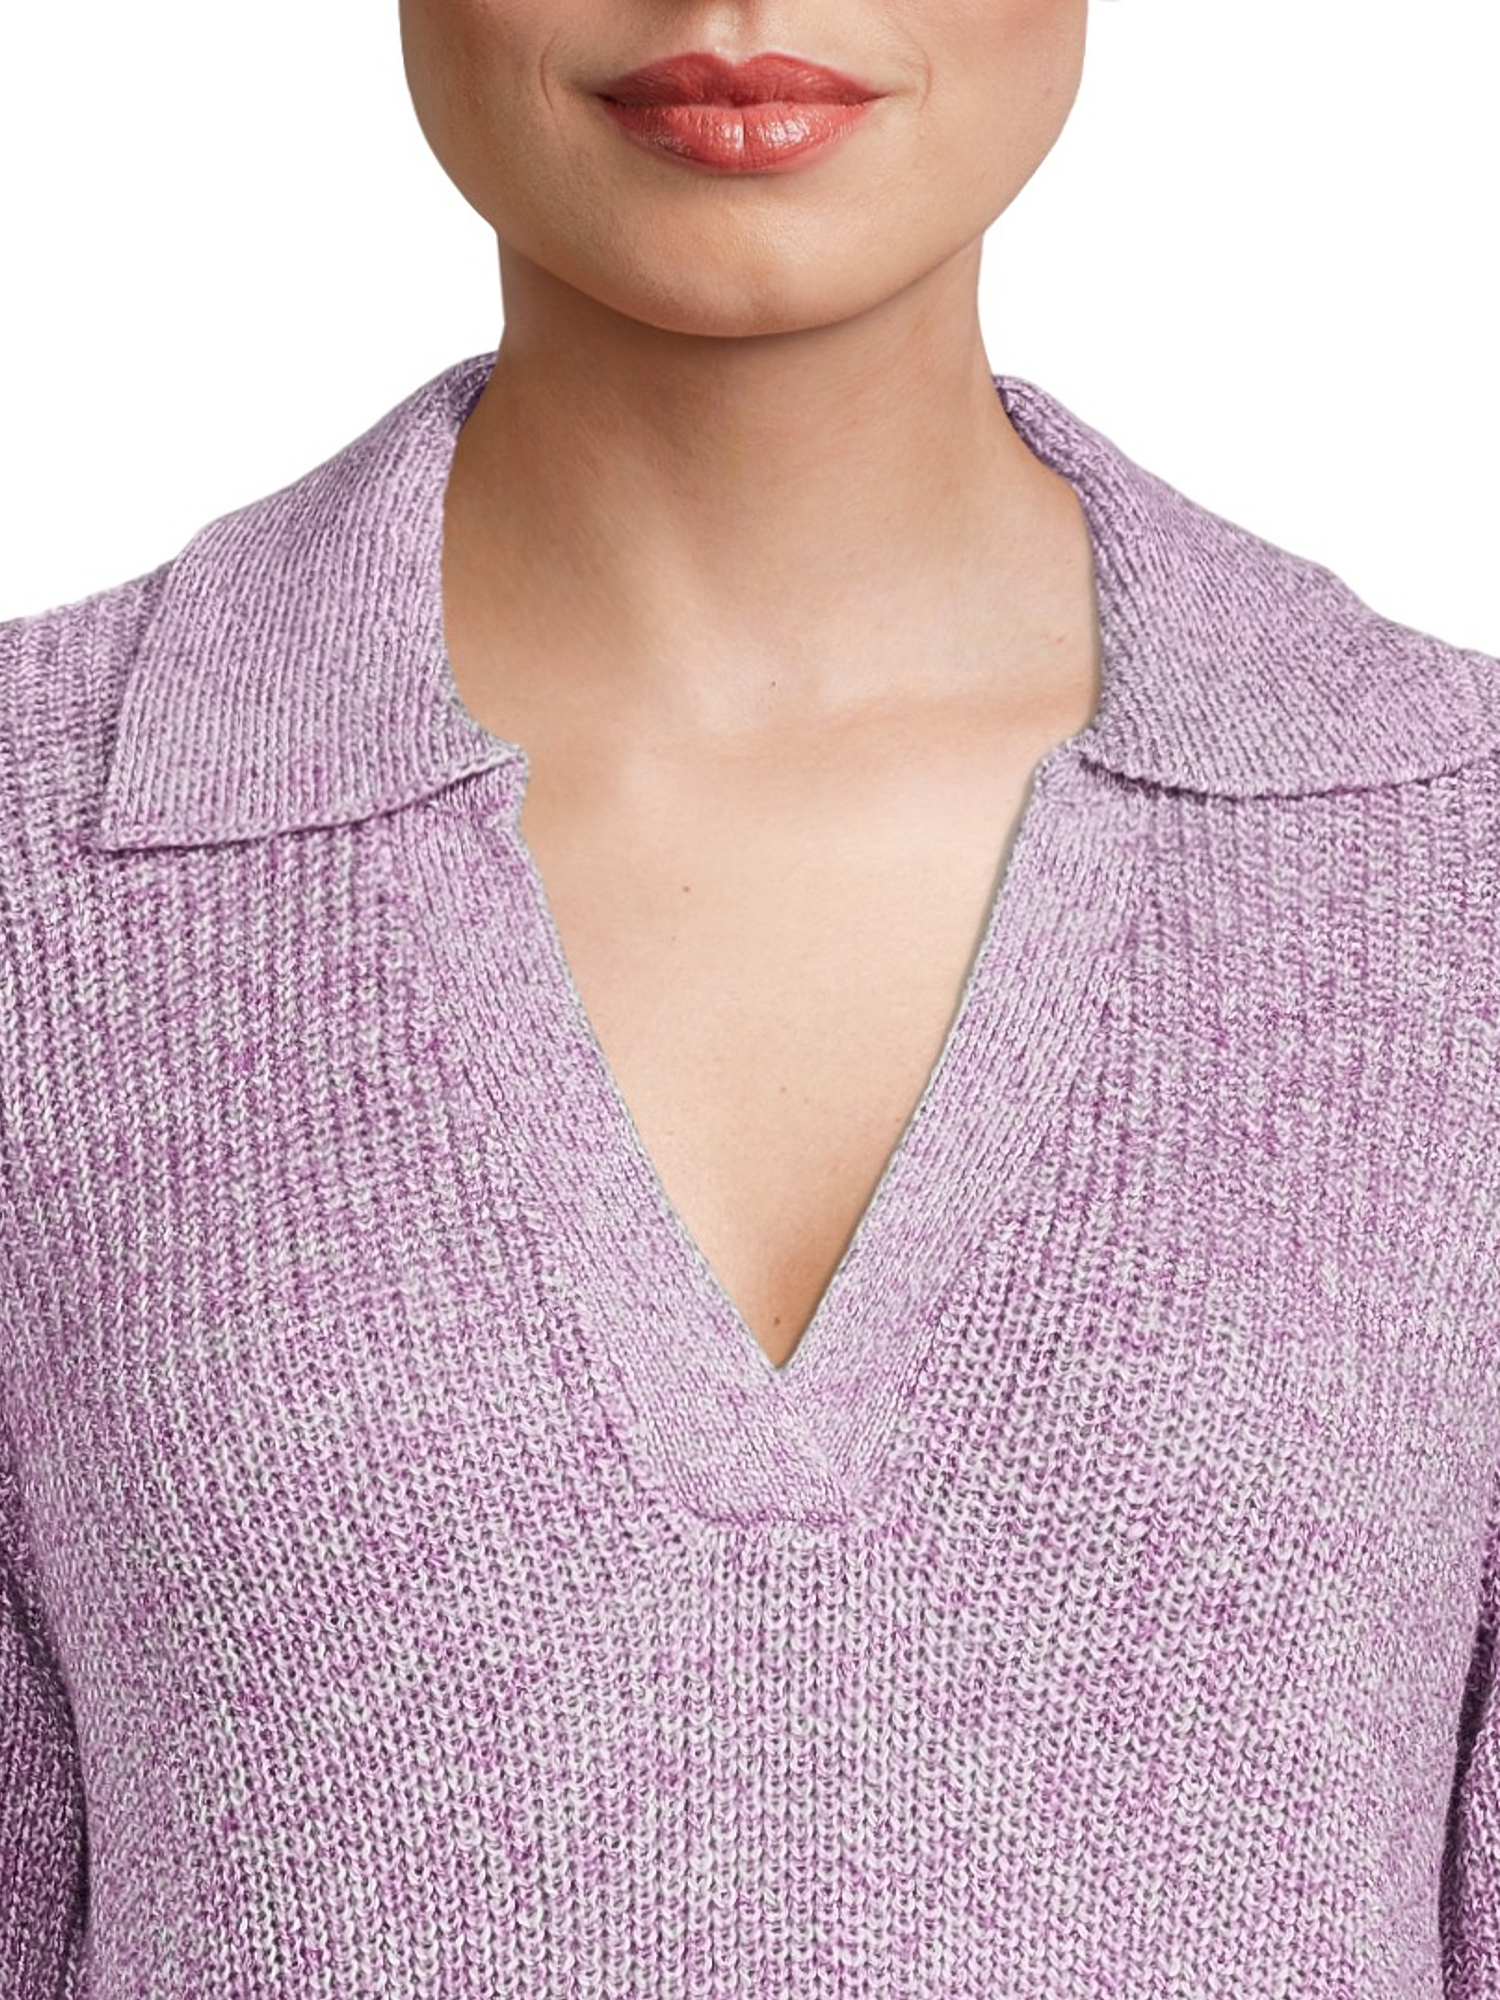 Time and Tru Women's Polo Sweater - image 5 of 5